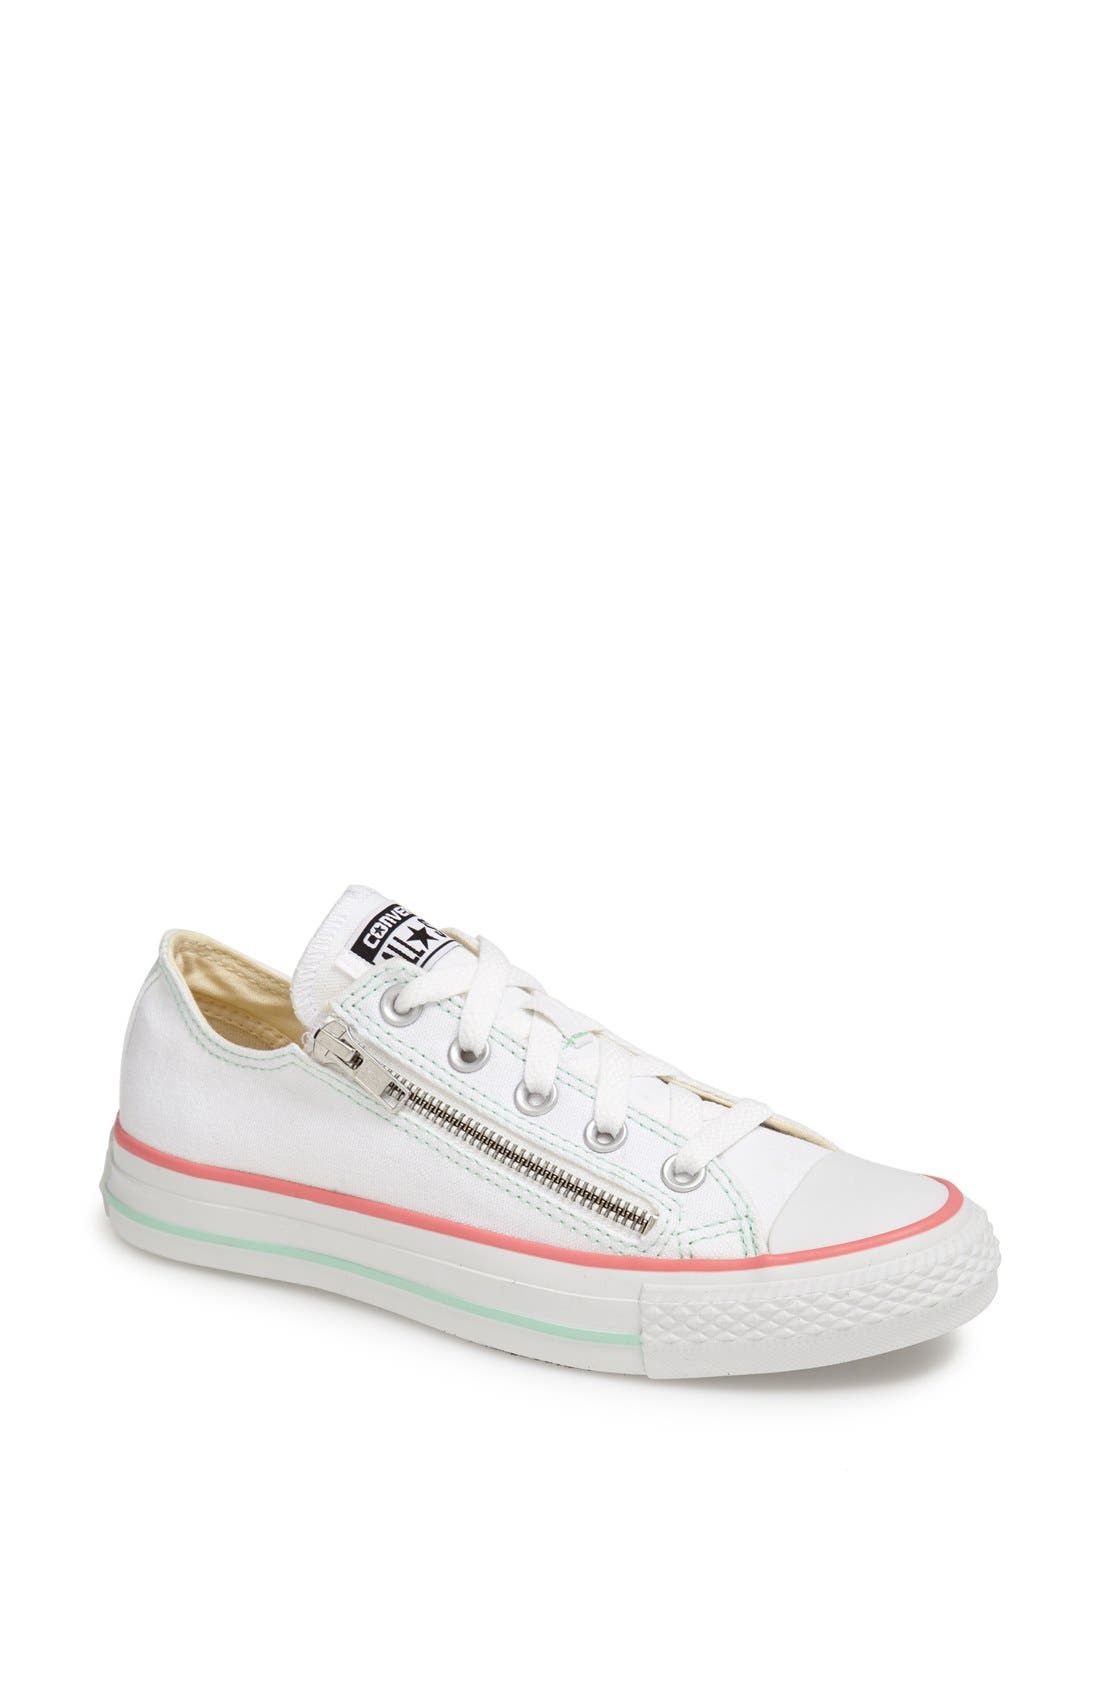 converse chuck taylor double zip low sneakers mens